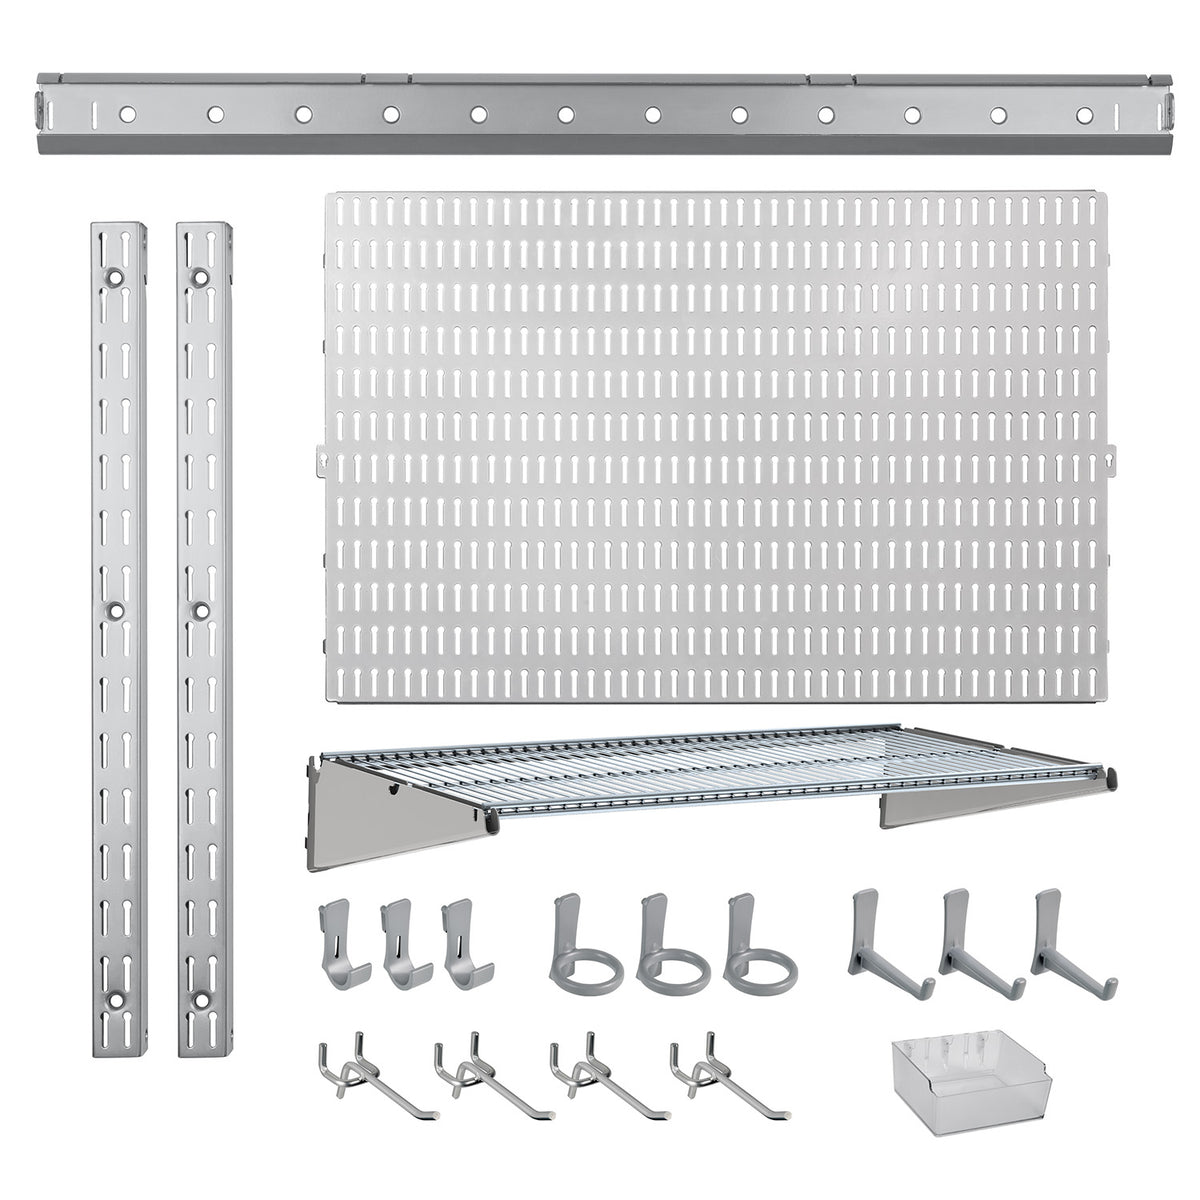 21 Pc. Garage Organizer Wall Storage System with Pegboard, Hooks and Hangers